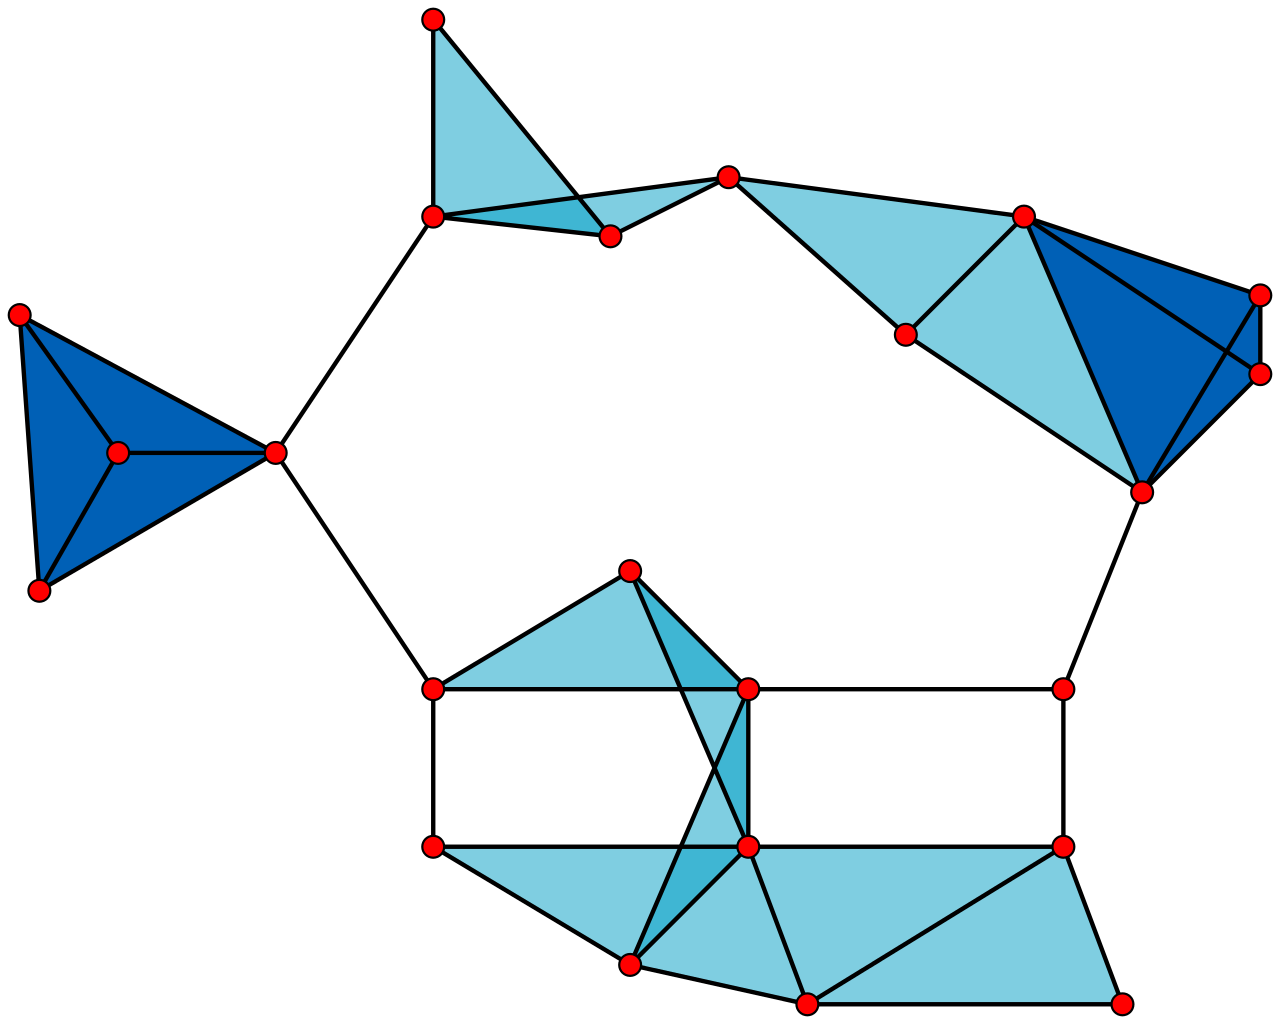 Maximal-cliques on a static graph.